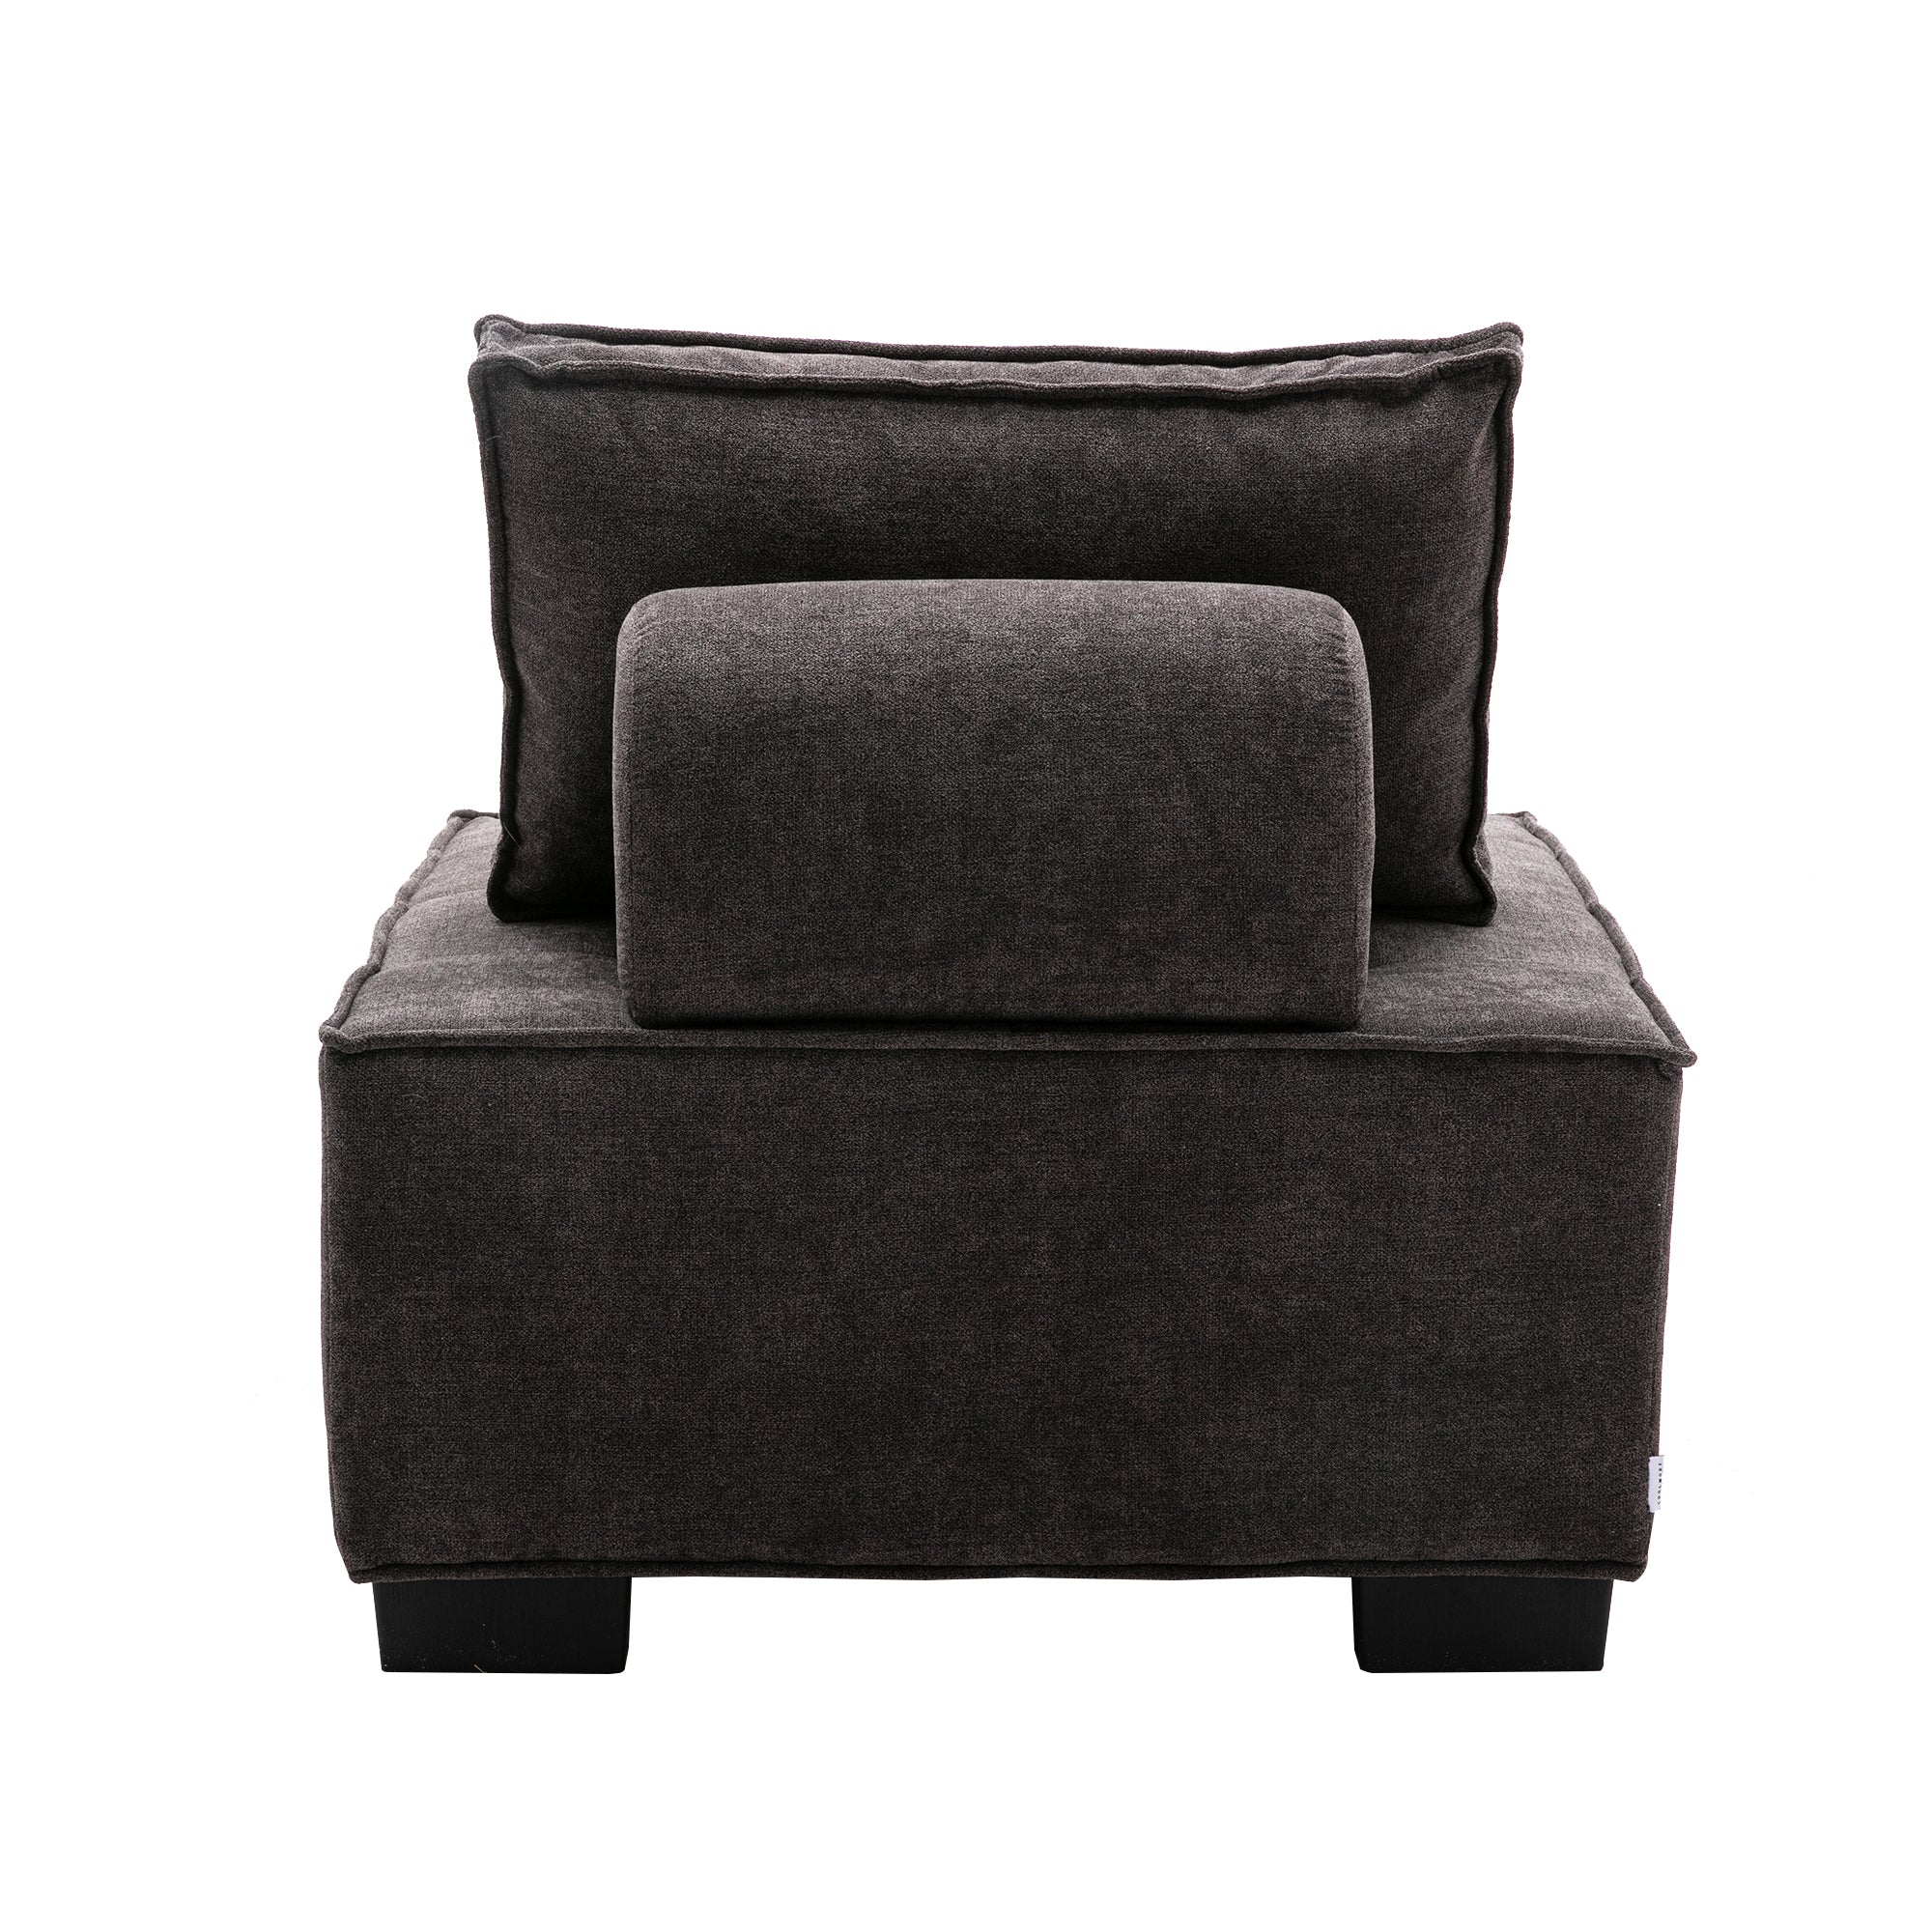 ZNTS COOMORE LIVING ROOM OTTOMAN /LAZY CHAIR W39541082